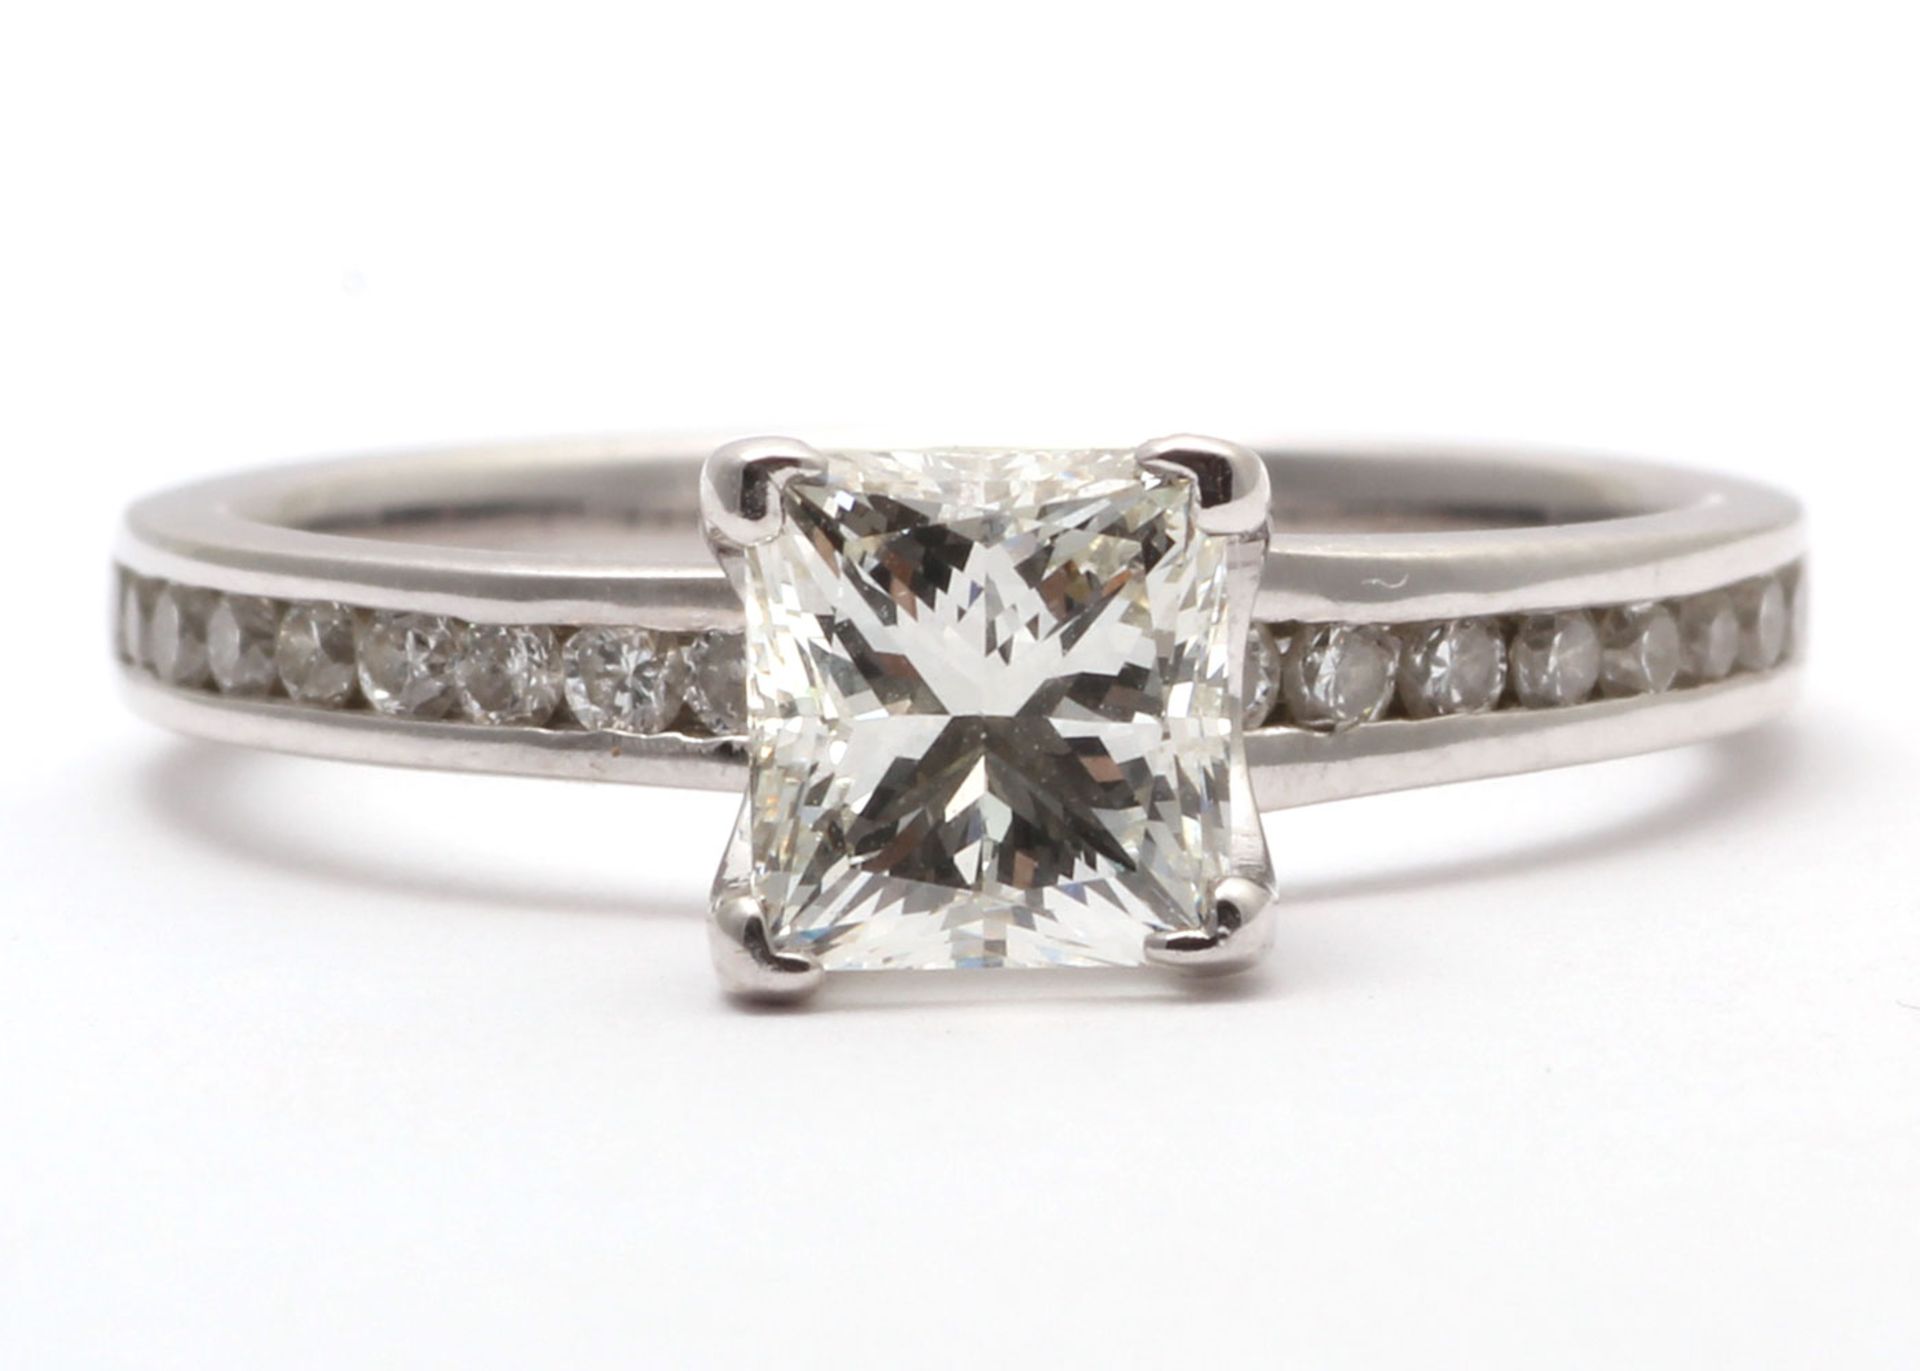 Flawless Princess Cut Diamond Ring With Stone Set Shoulders (1.10) 1.37 Carats